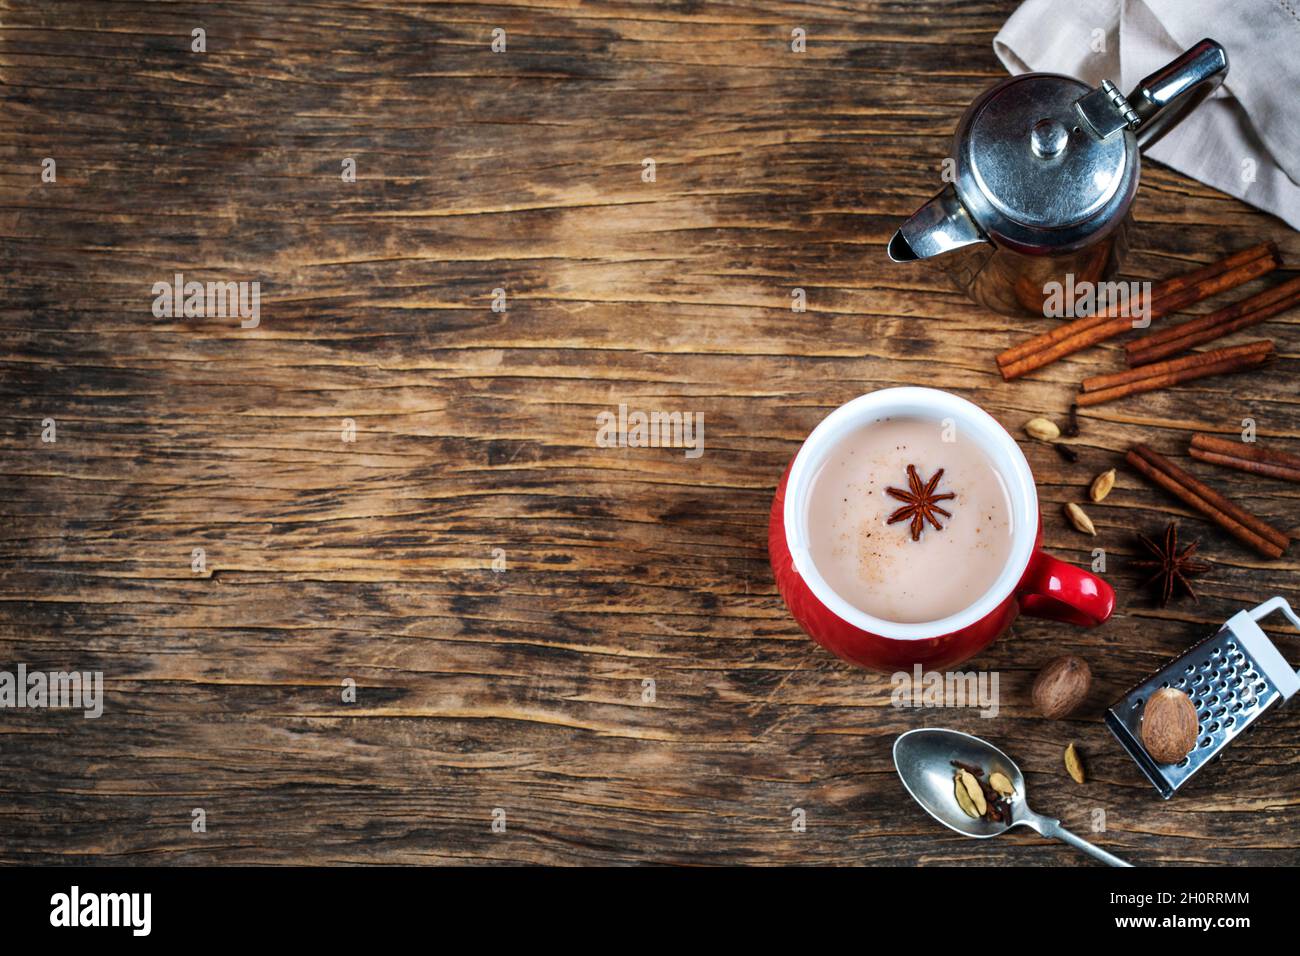 Cup of masala chai tea on a table with fresh spices and kitchen equipment Stock Photo